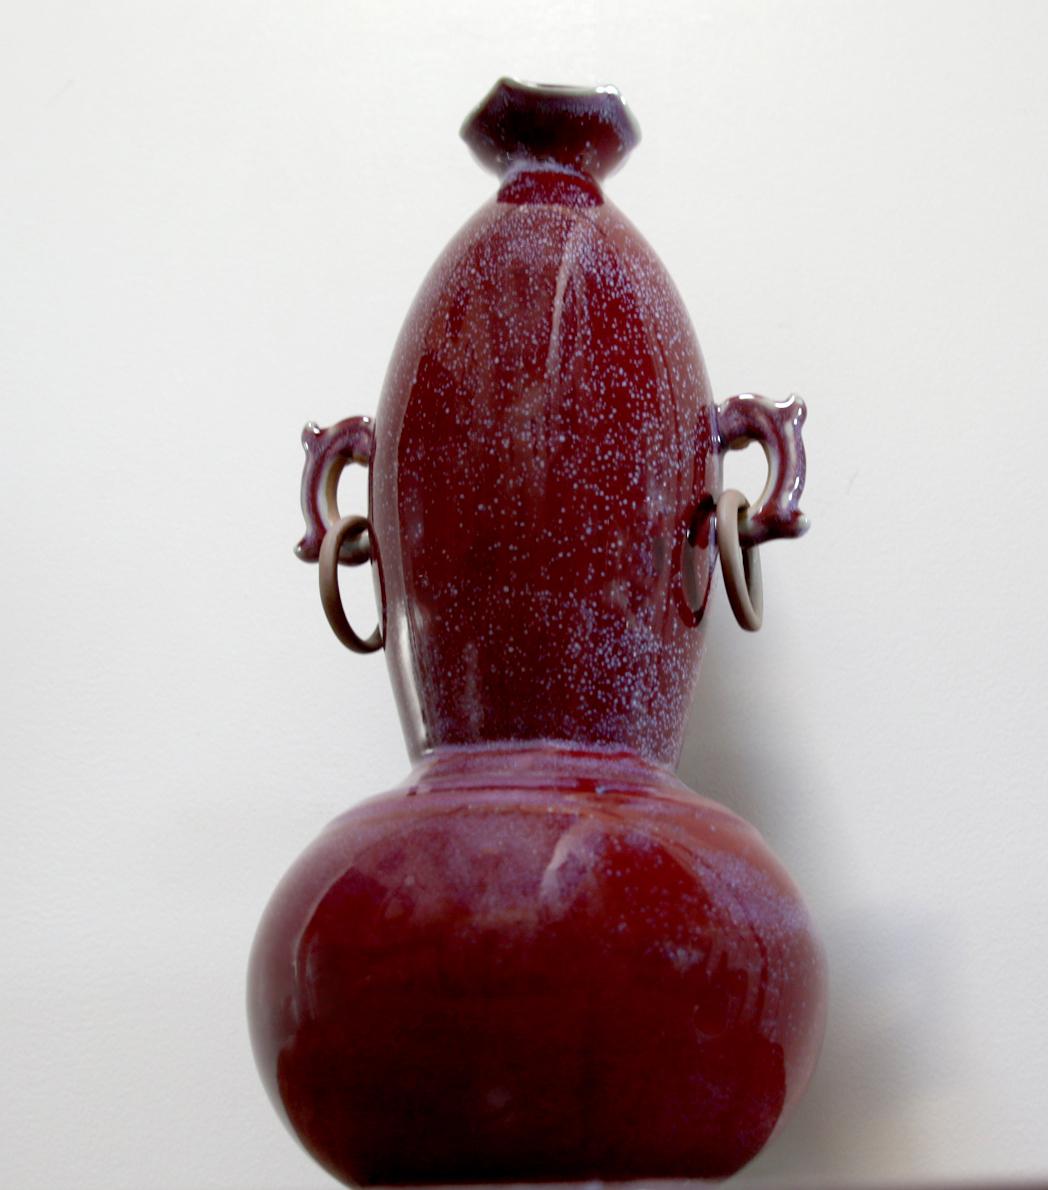 19th Century Rare Sang de Boeuf, Oxblood Gourd Vase with Ears, Copper Rings For Sale 1